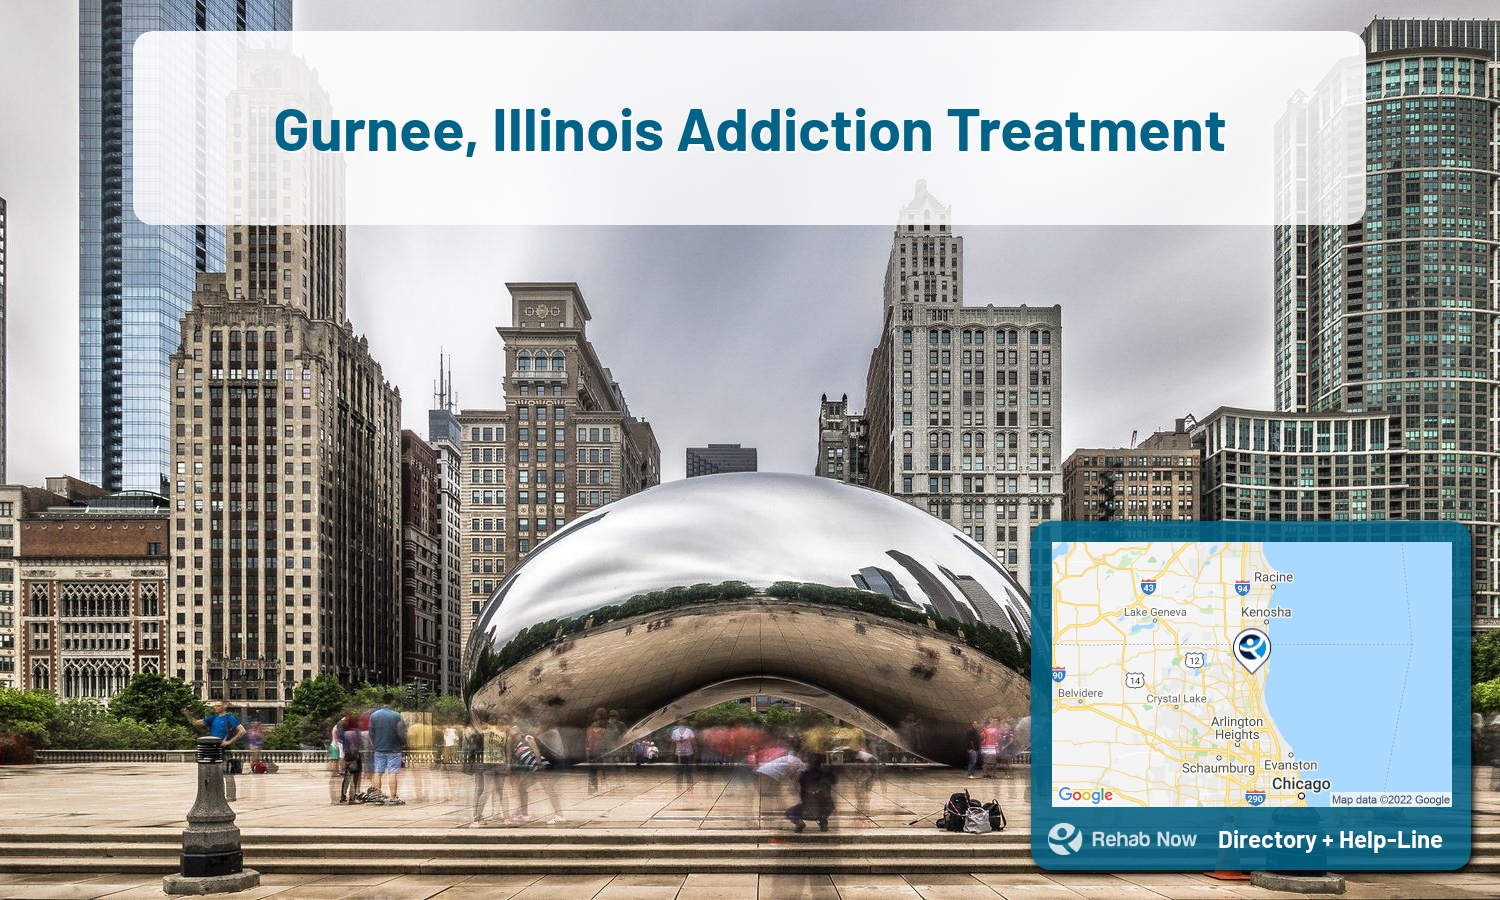 Gurnee, IL Treatment Centers. Find drug rehab in Gurnee, Illinois, or detox and treatment programs. Get the right help now!